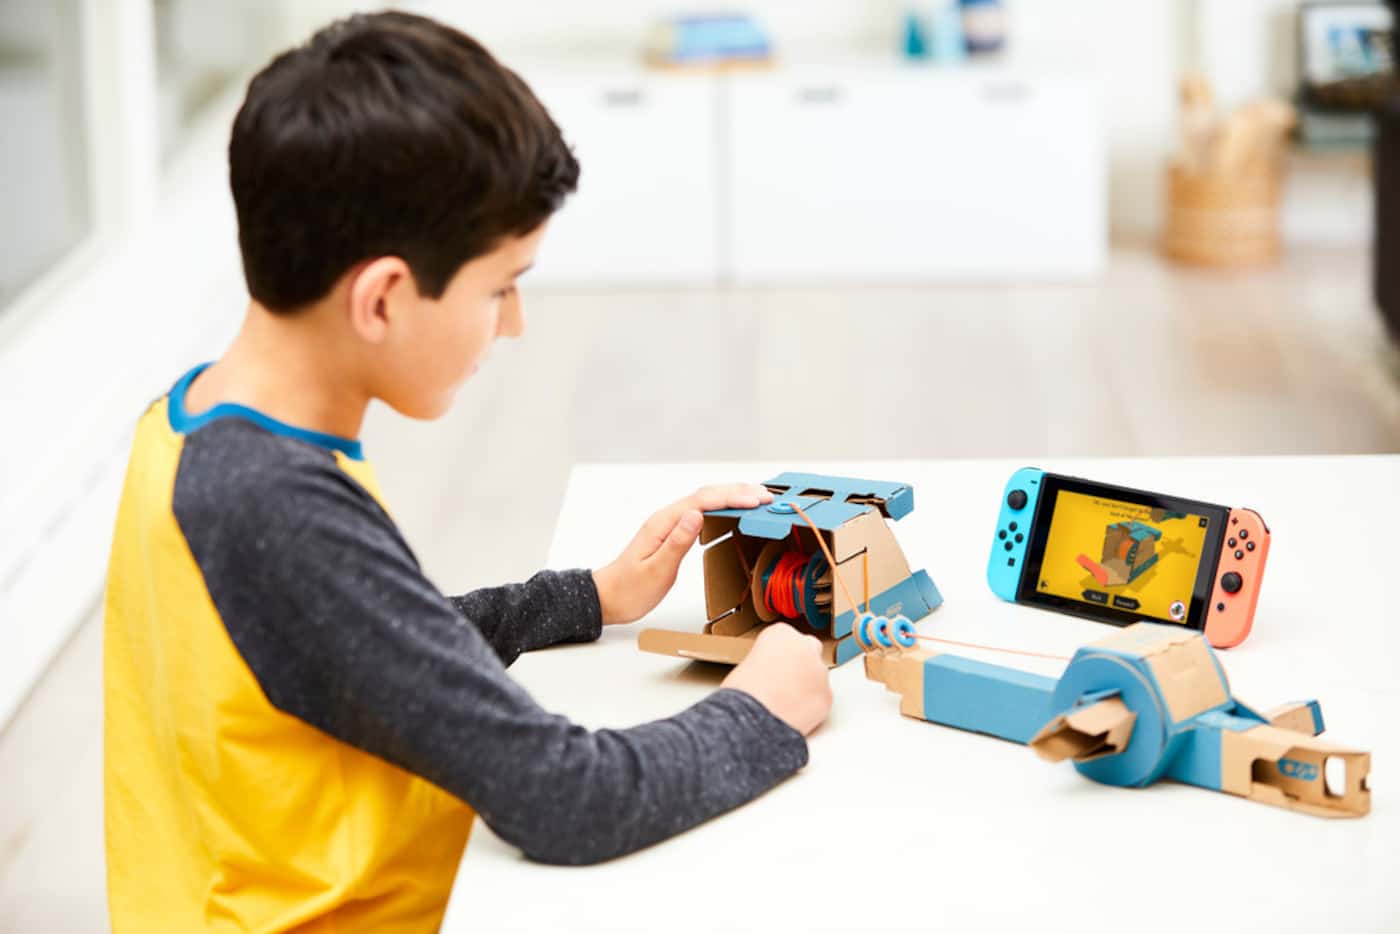 The Toy-Con Fishing Rod is included as part of
the Nintendo Labo Variety Kit. Nintendo...